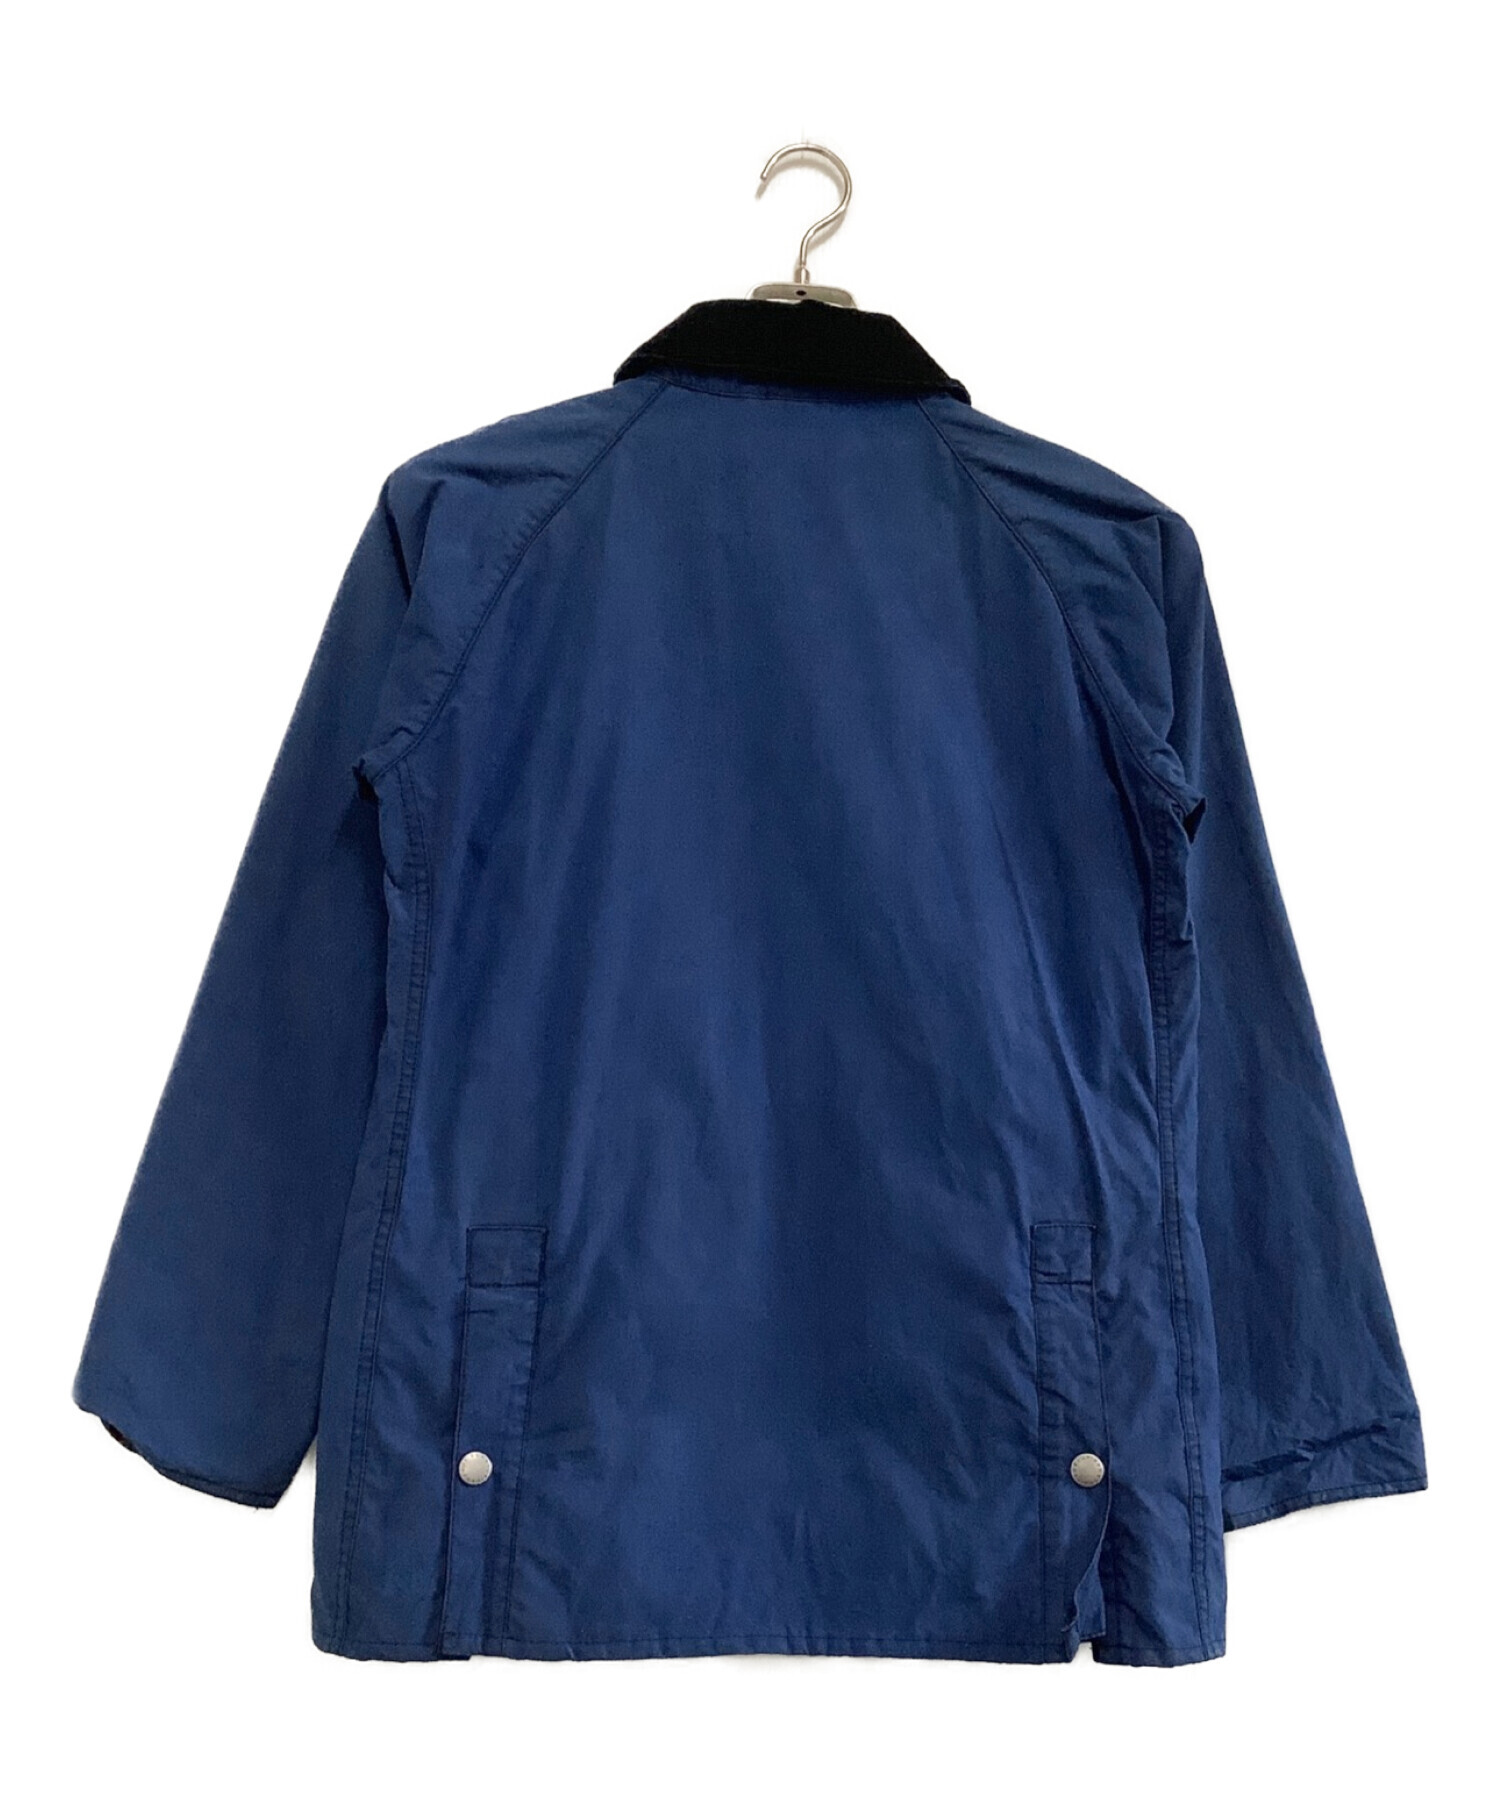 Barbour (バブアー) SL BEDALE WASHEDジャケット ブルー サイズ:36